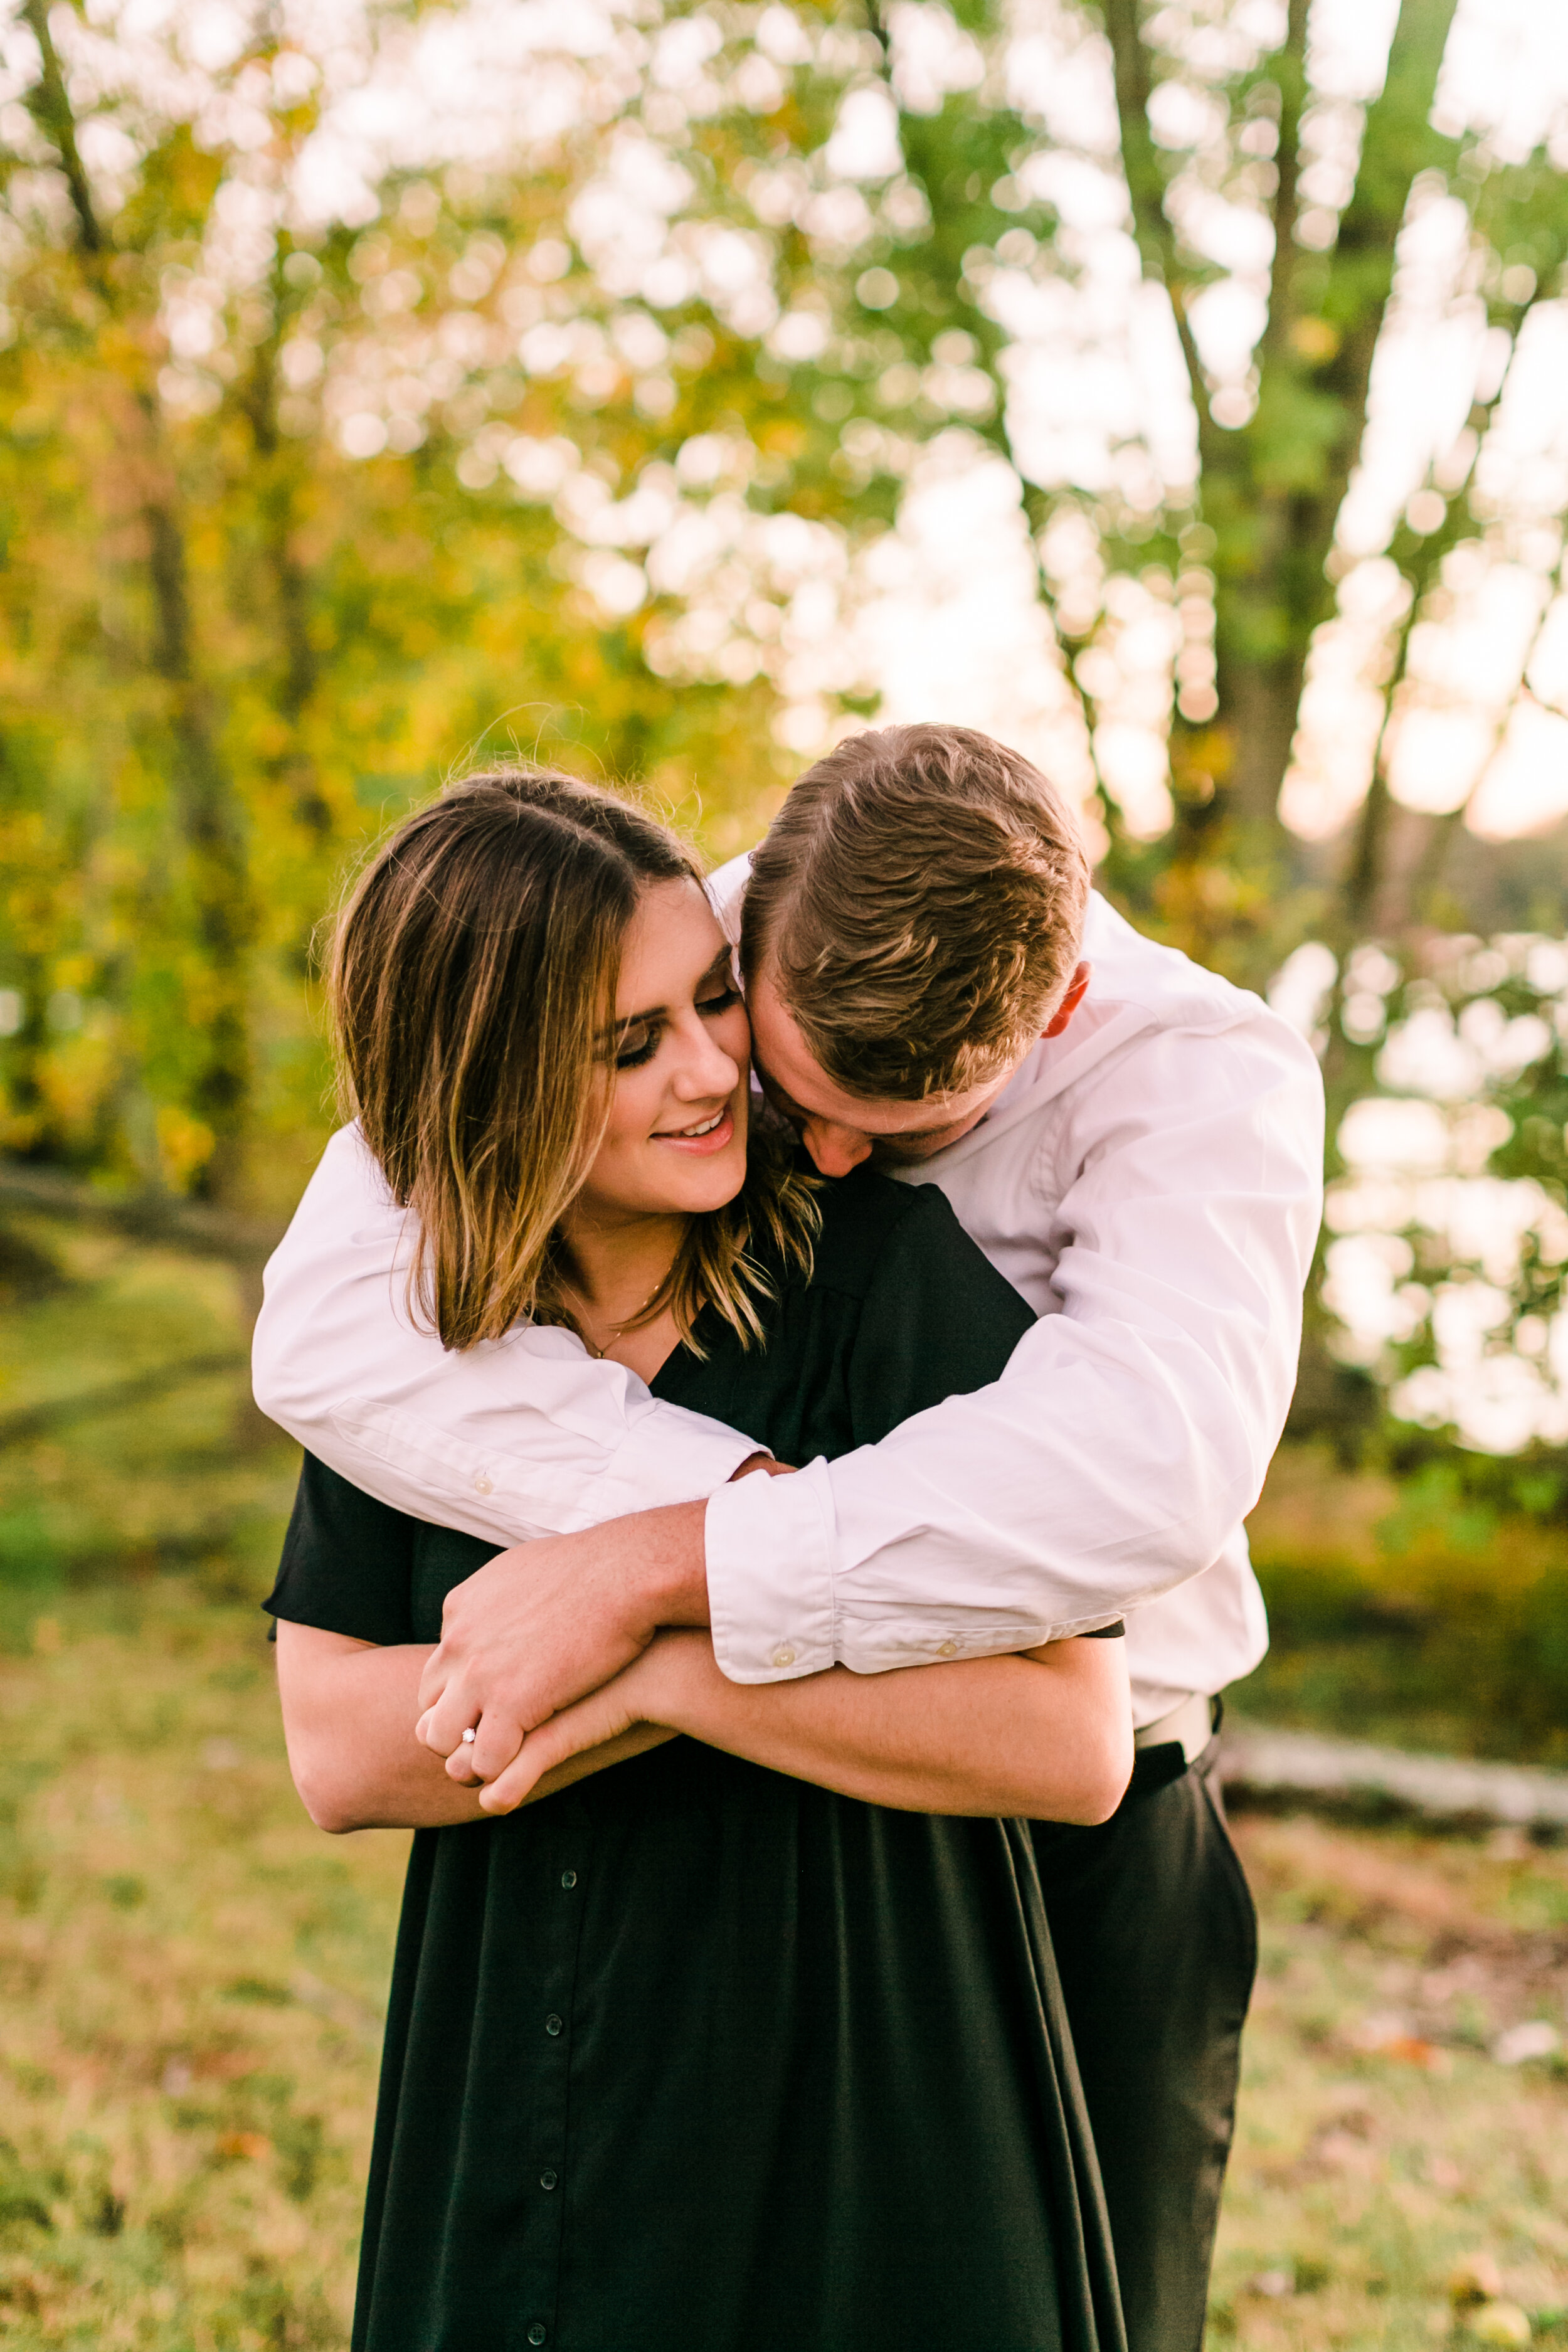 Tennessee+Fall+Engagement+Photos+Puppy (61 of 63).jpg